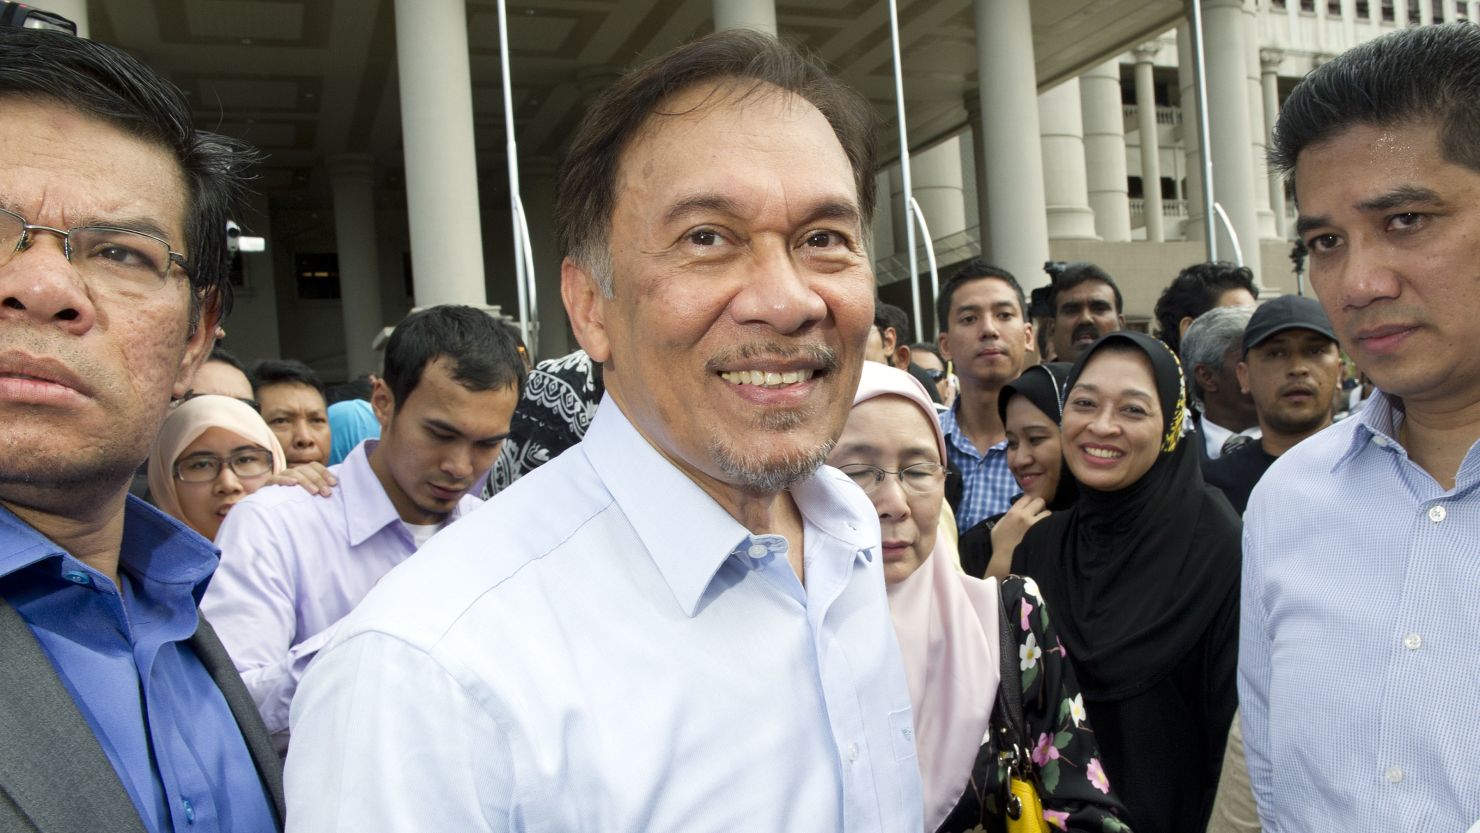 Malaysian reformer Anwar Ibrahim has targeted corruption and governance in his campaigns